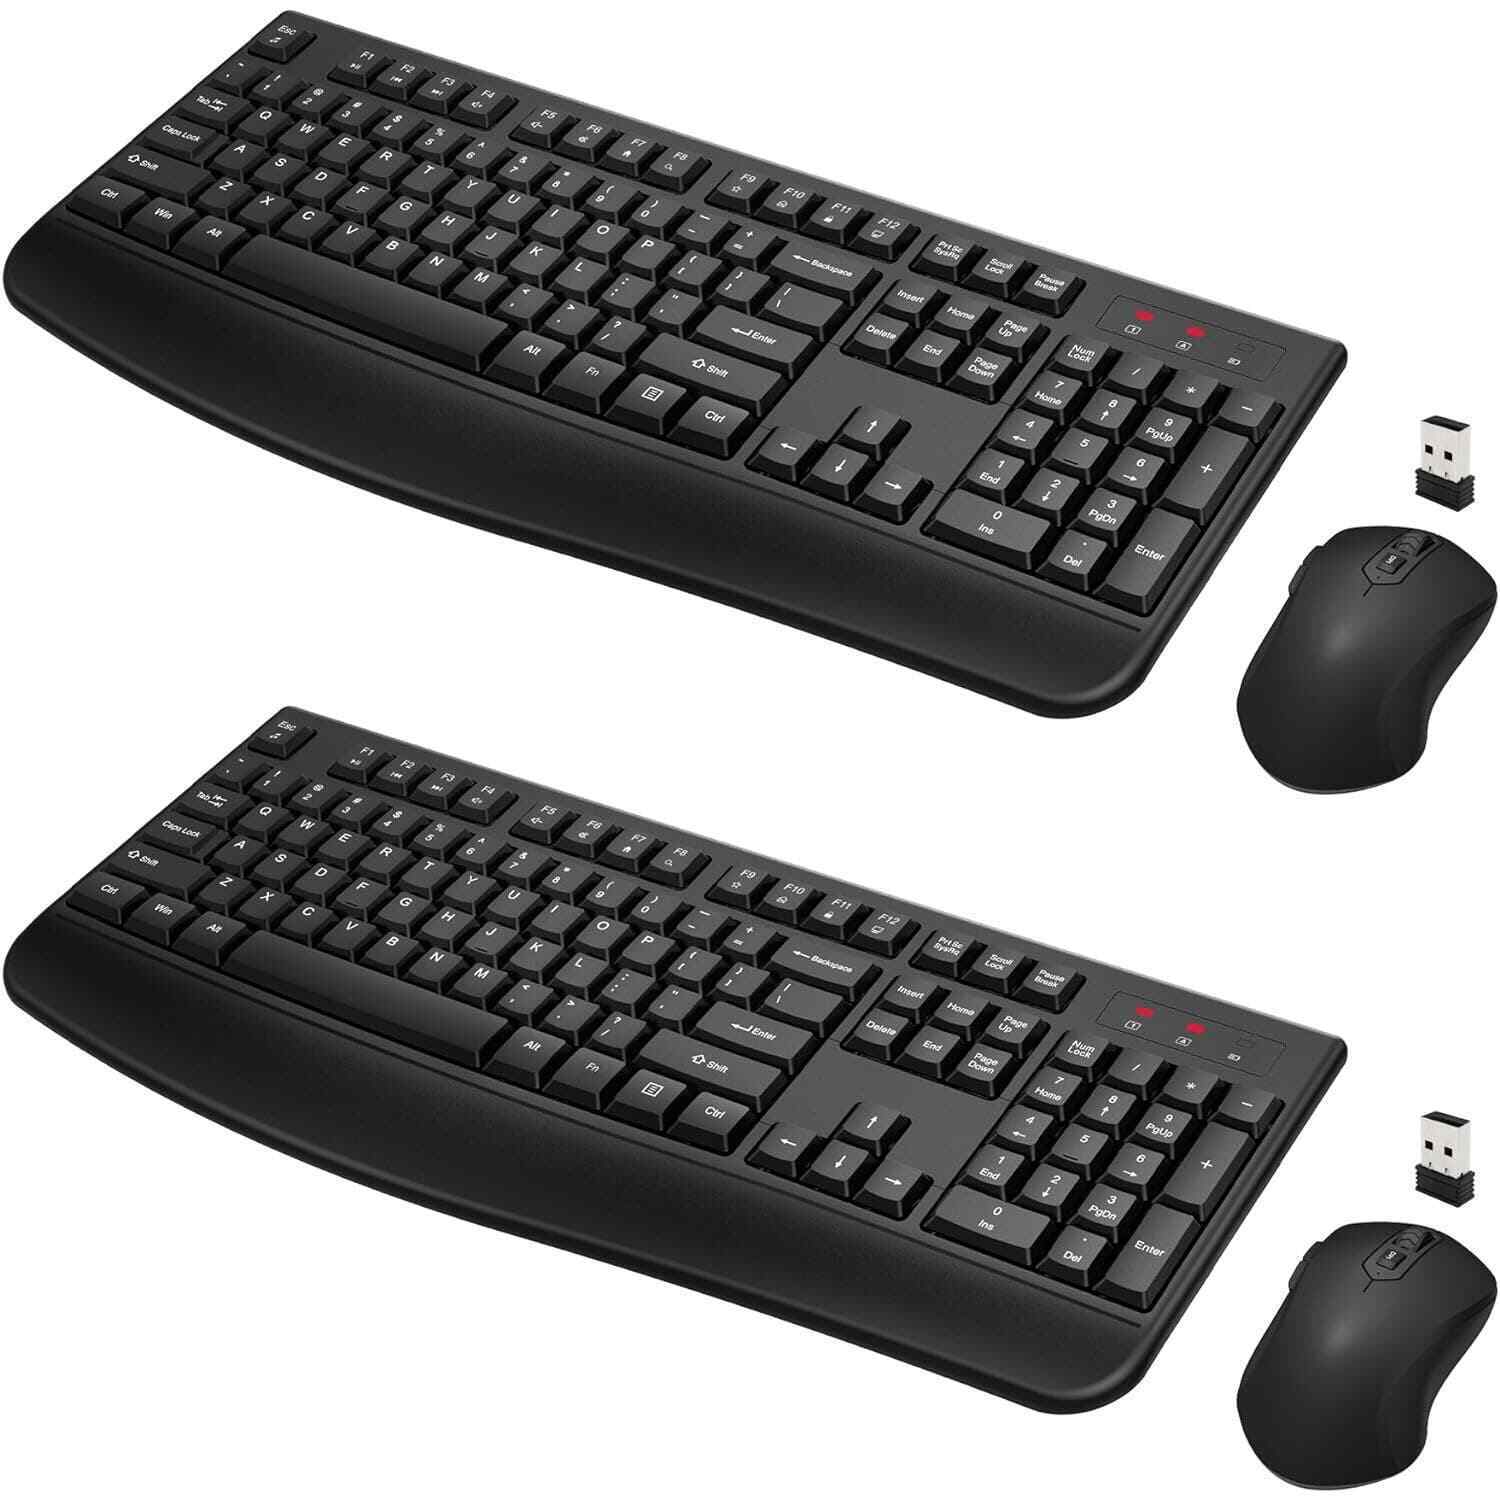 2 pack Wireless Keyboard & Mouse Combo, Full-Sized 2.4GHz Optical Wireless Mouse